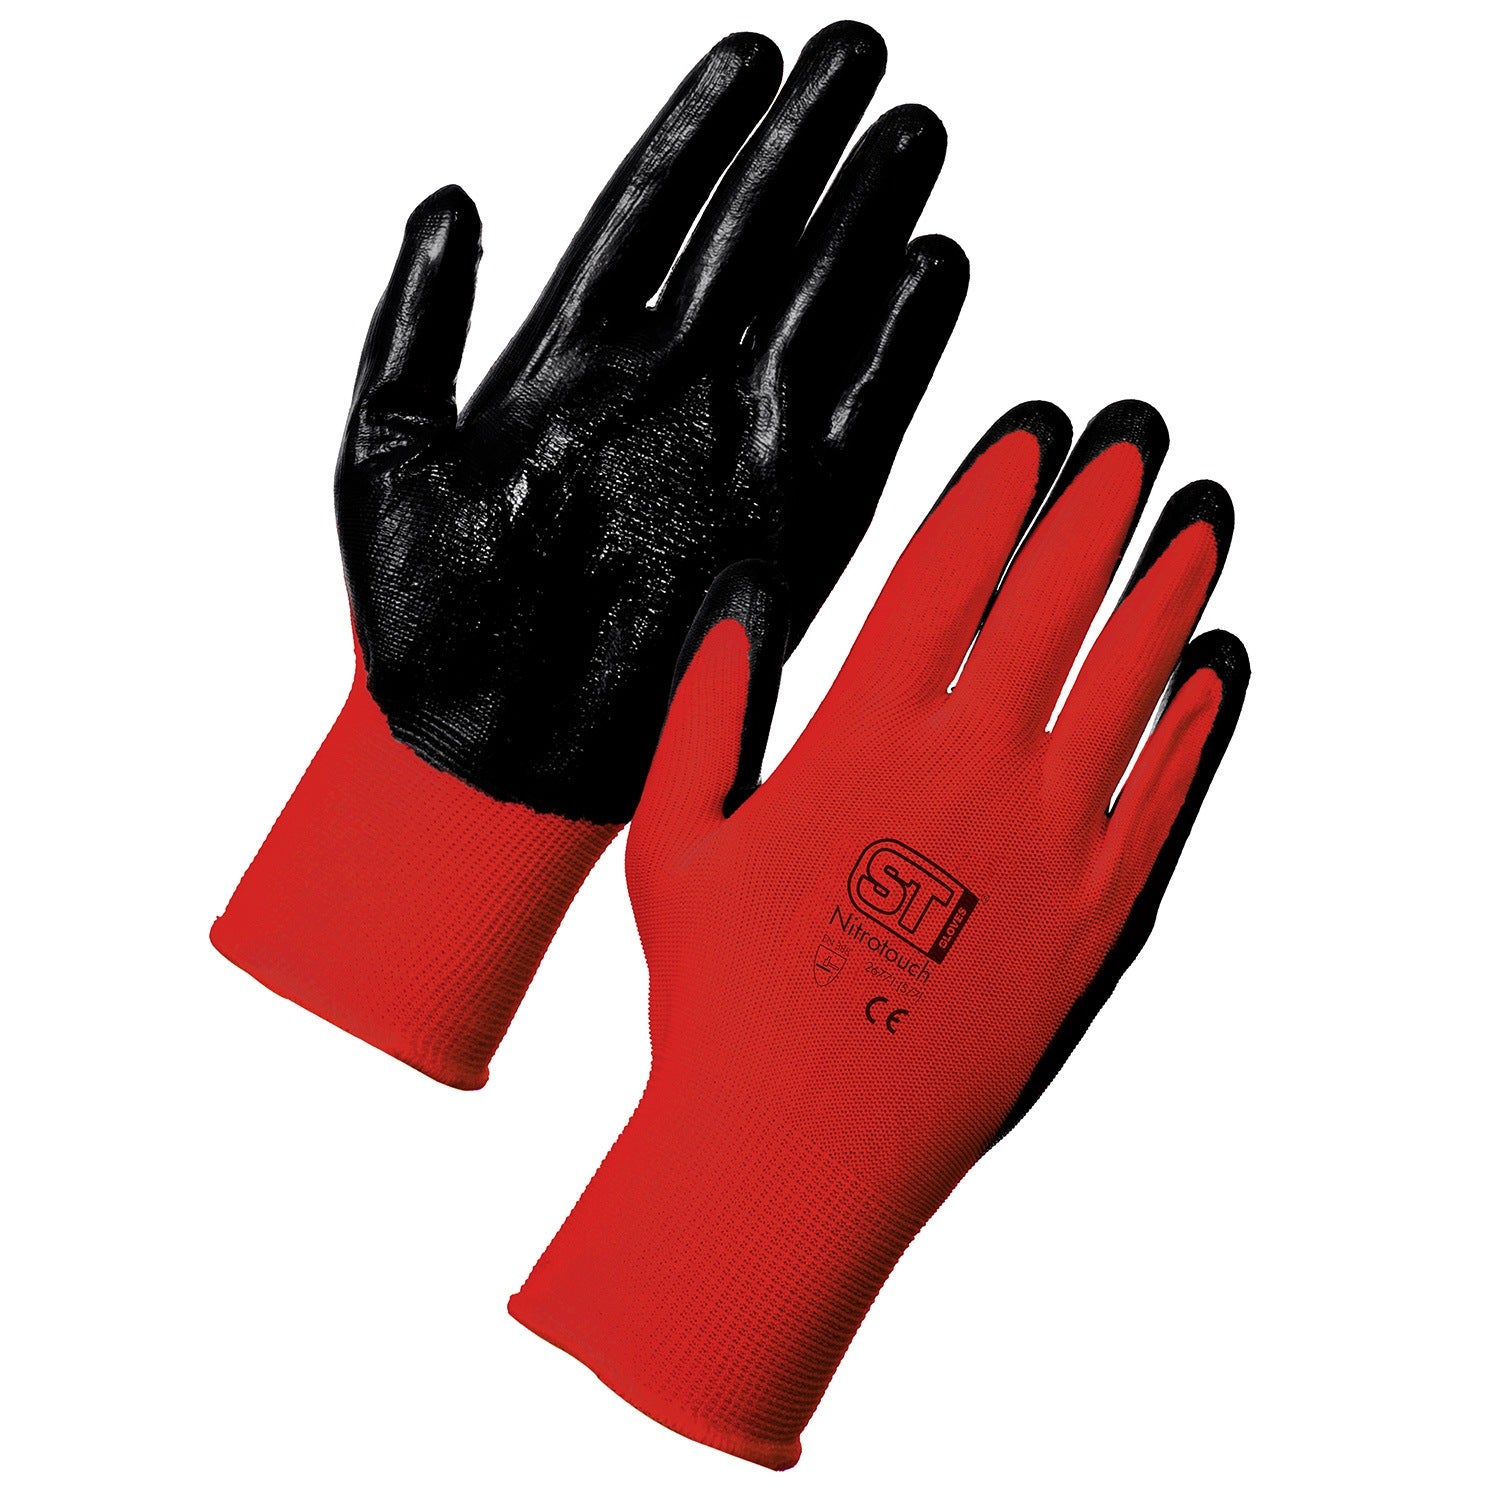 Supertouch Nitrotouch Gloves - G72